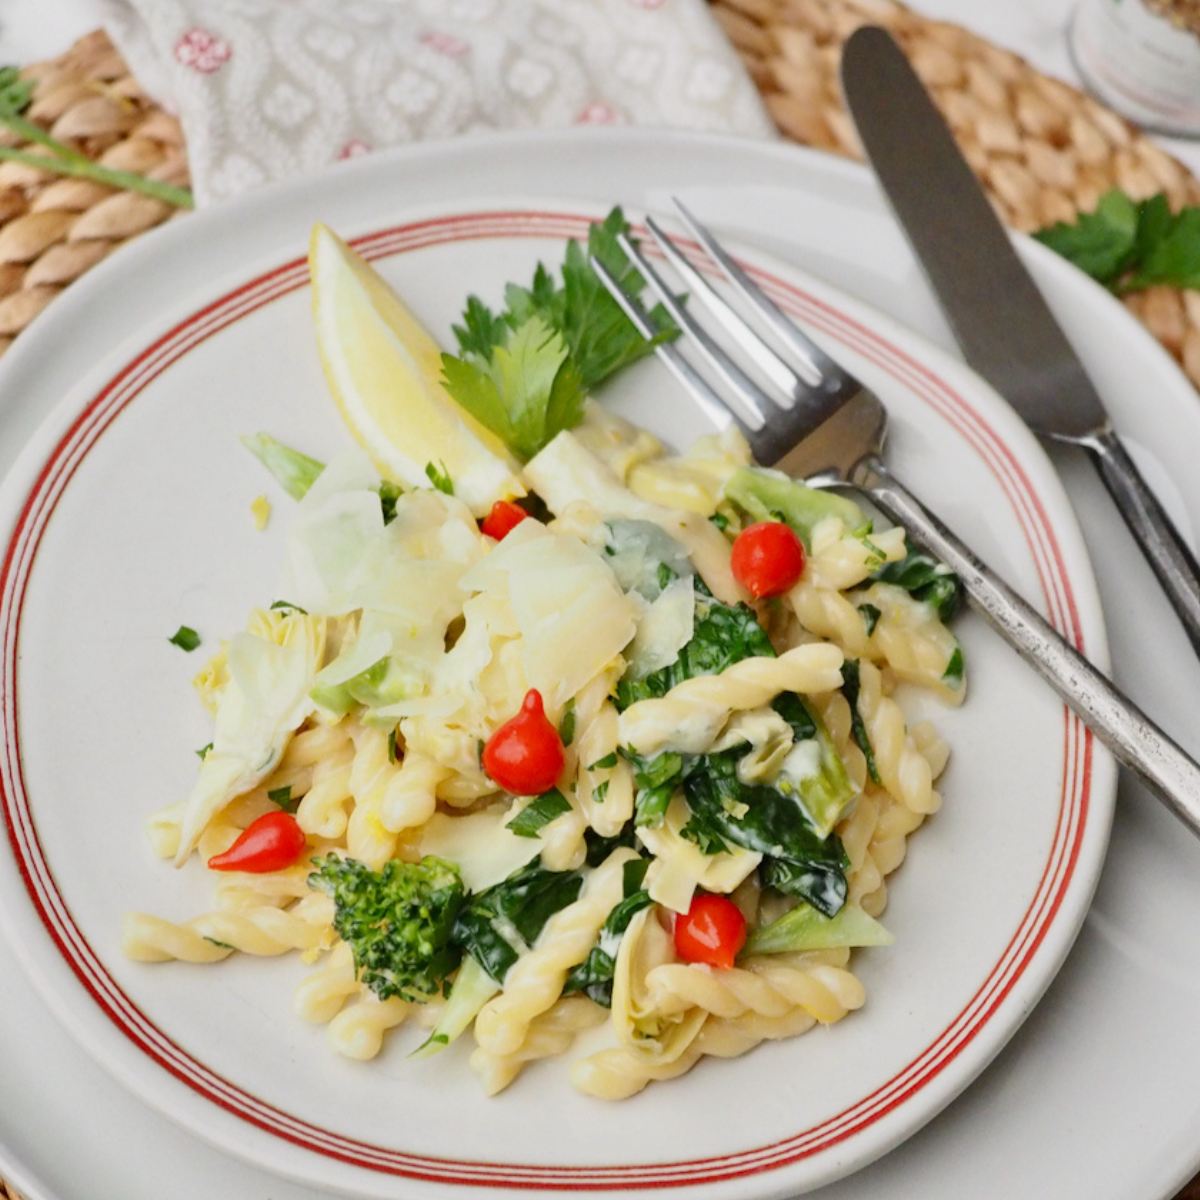 Plate and fork with serving of garlic lemon pasta with veggies.